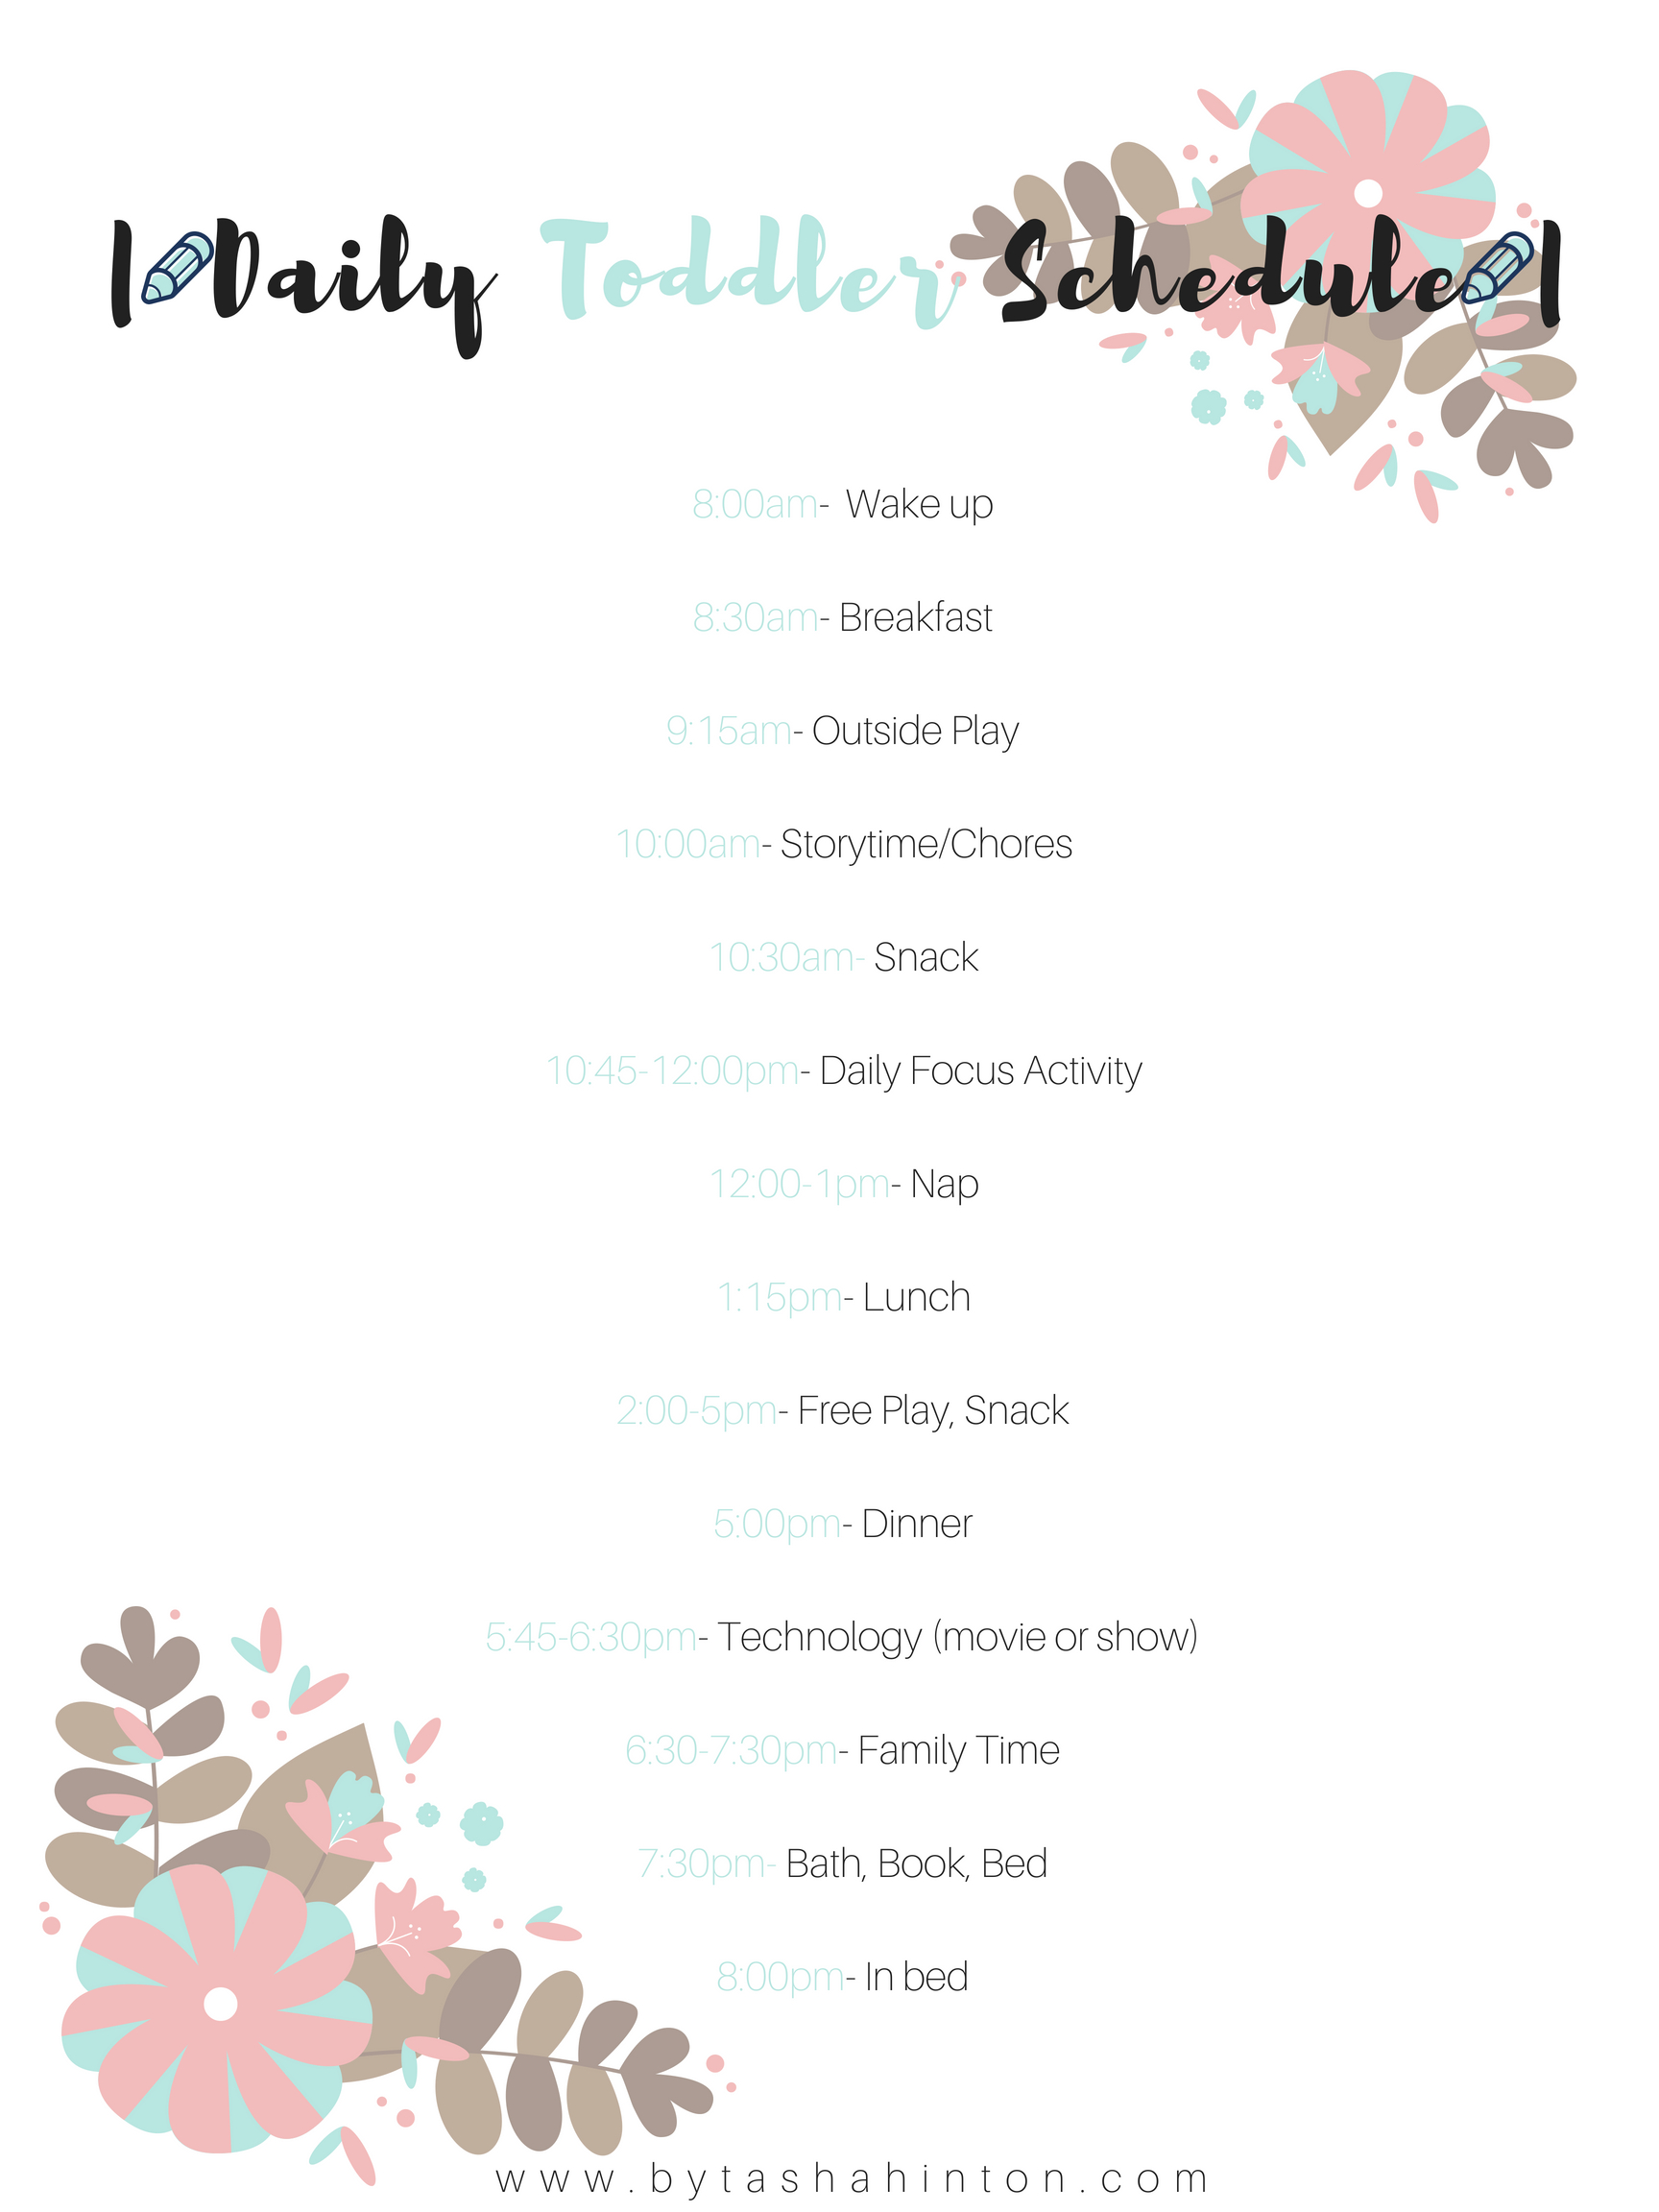 Daily toddler schedule